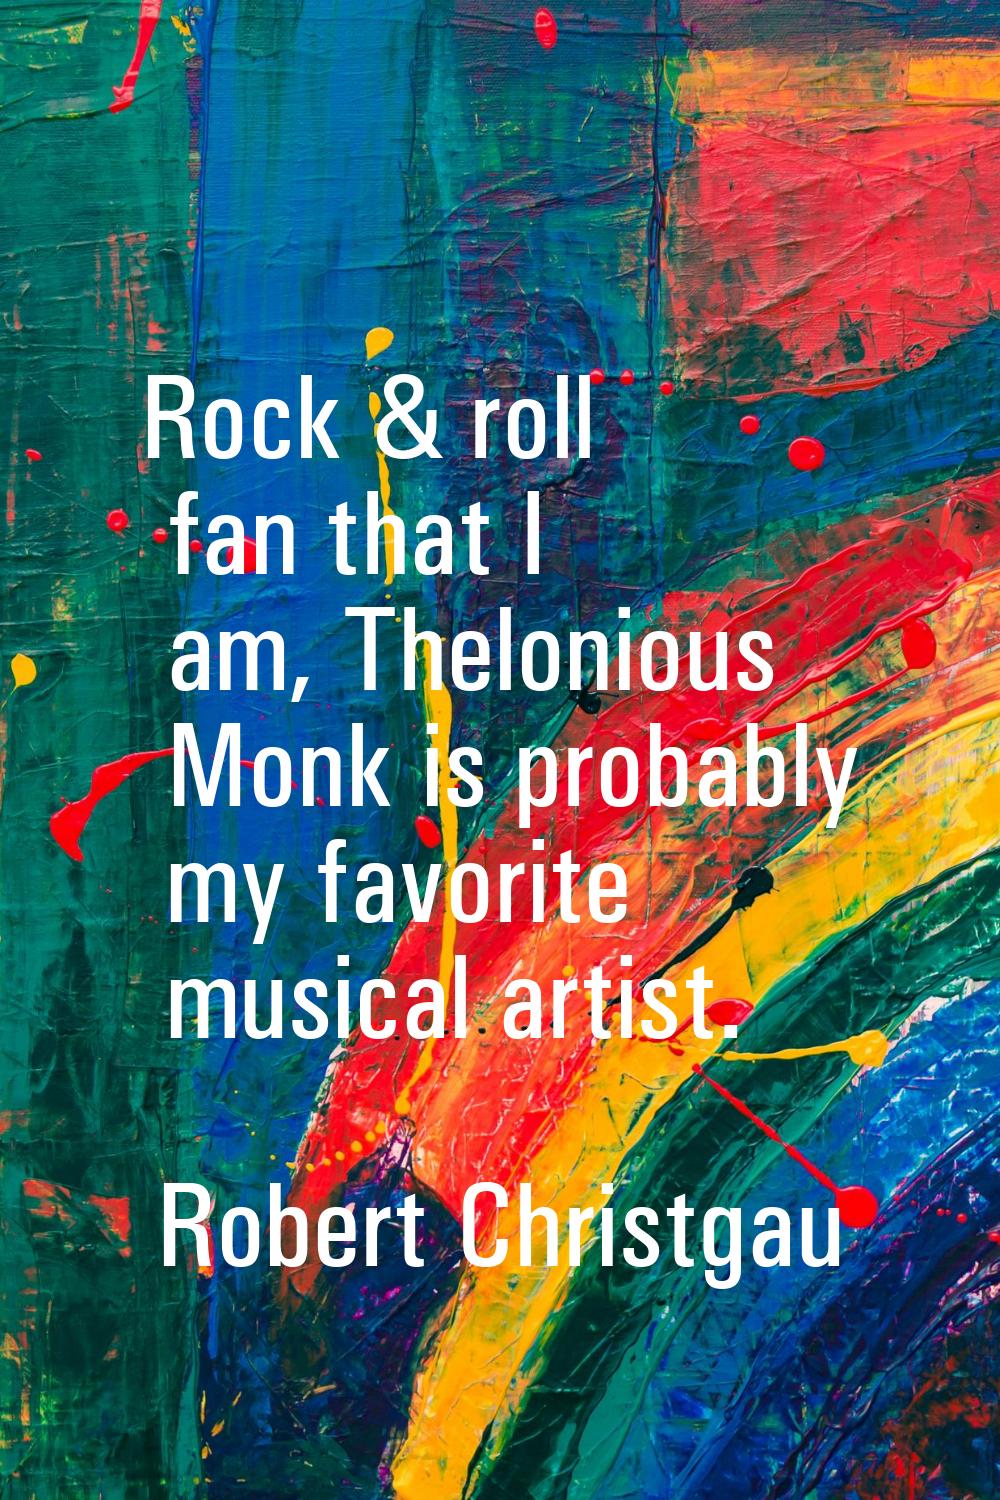 Rock & roll fan that I am, Thelonious Monk is probably my favorite musical artist.